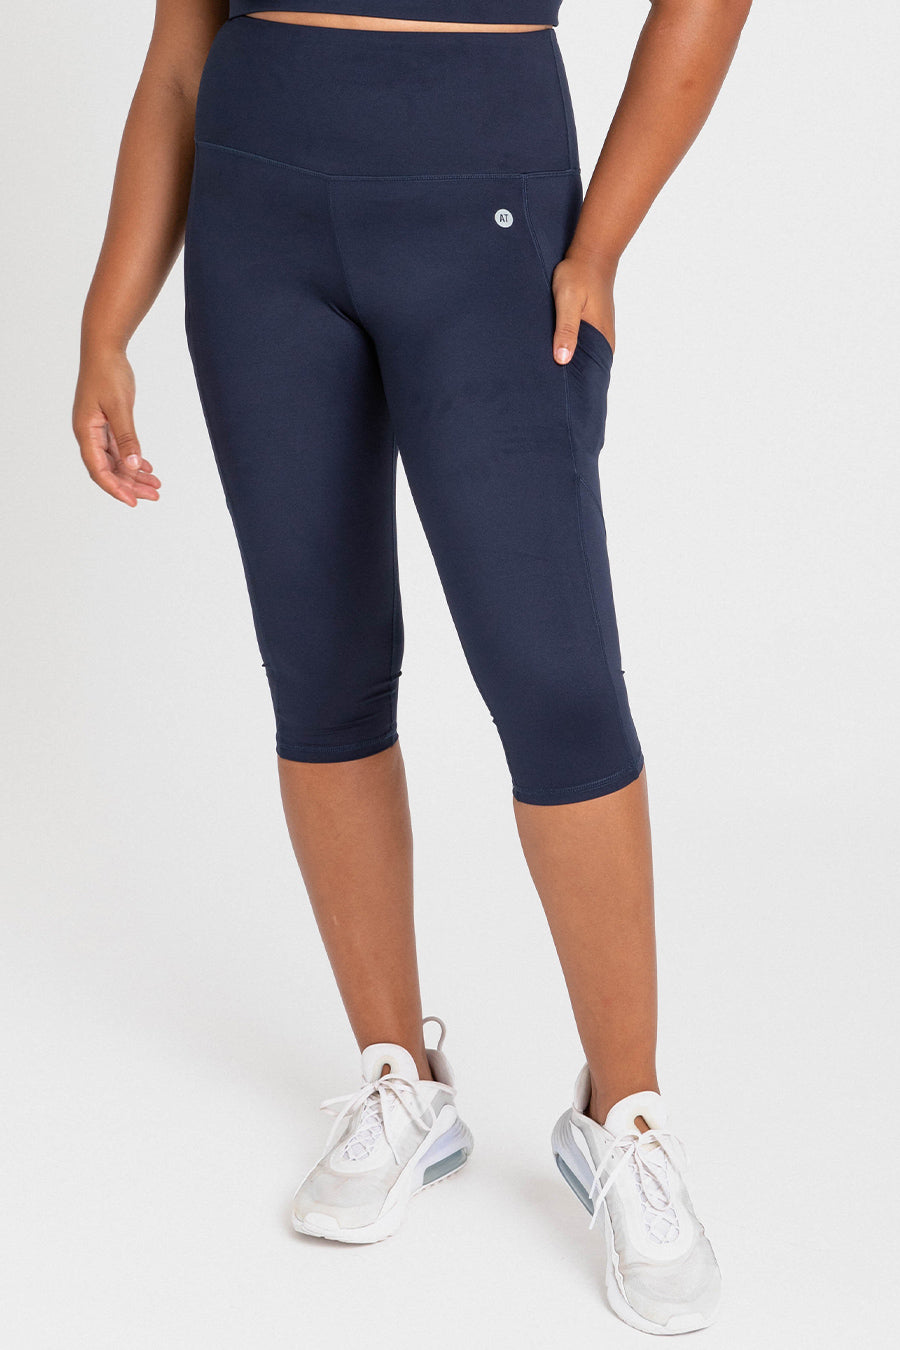 Smart Pocket 3/4 Length Tight - Midnight Blue from Active Truth™
